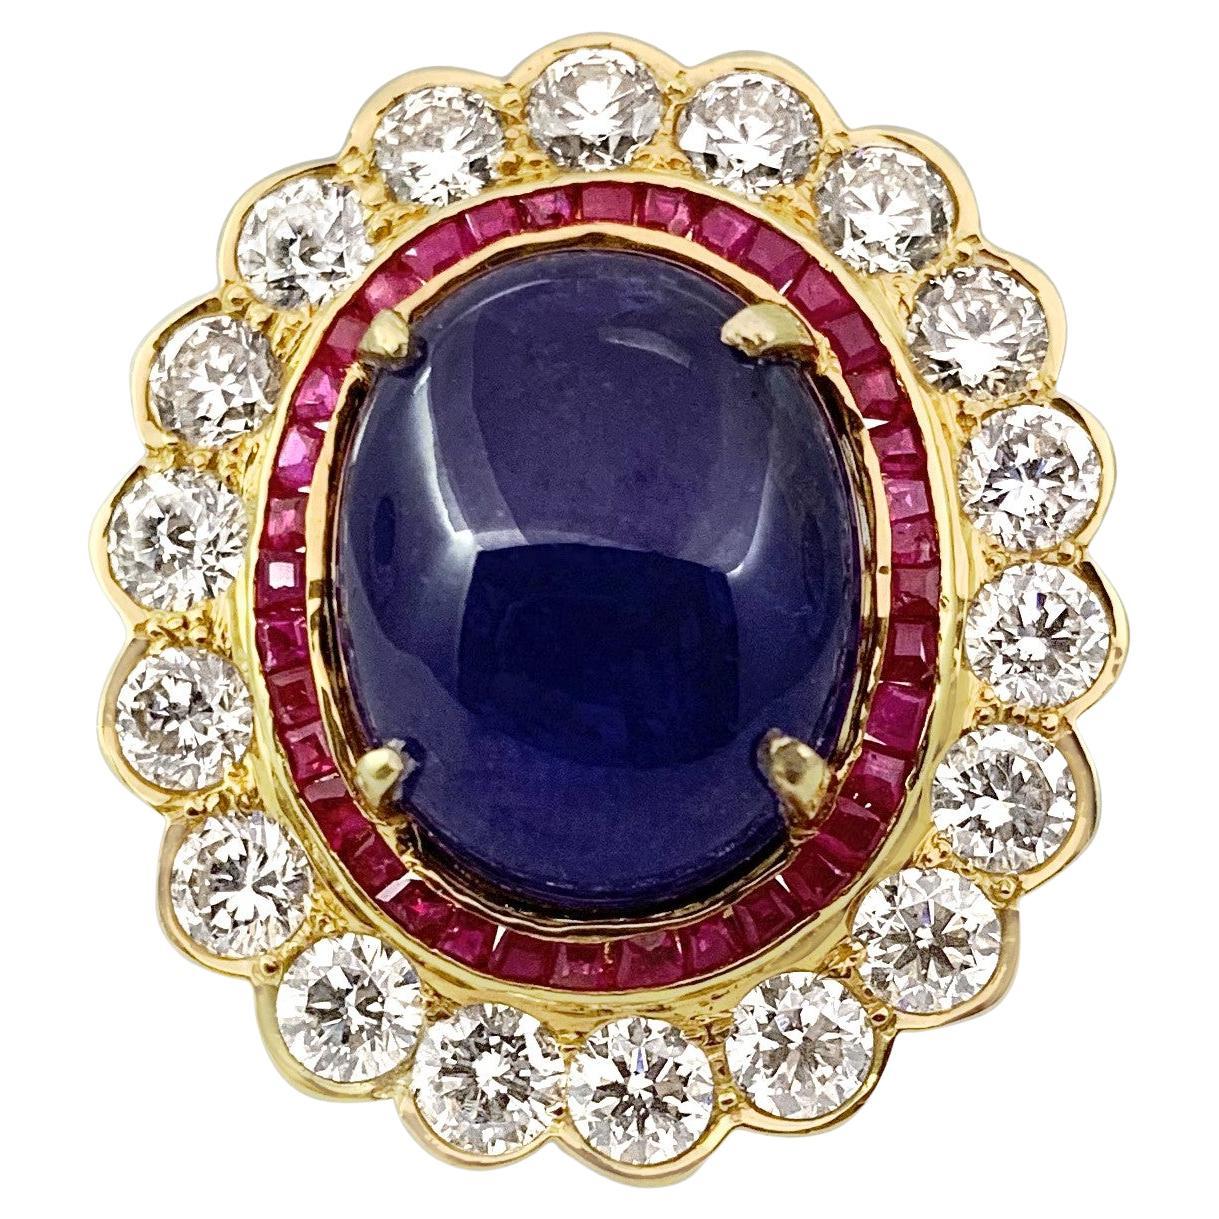 19.61 Carat Tanzanite with 1.41 Carat Ruby and 4.89 Carat Diamond 18K Gold Ring For Sale